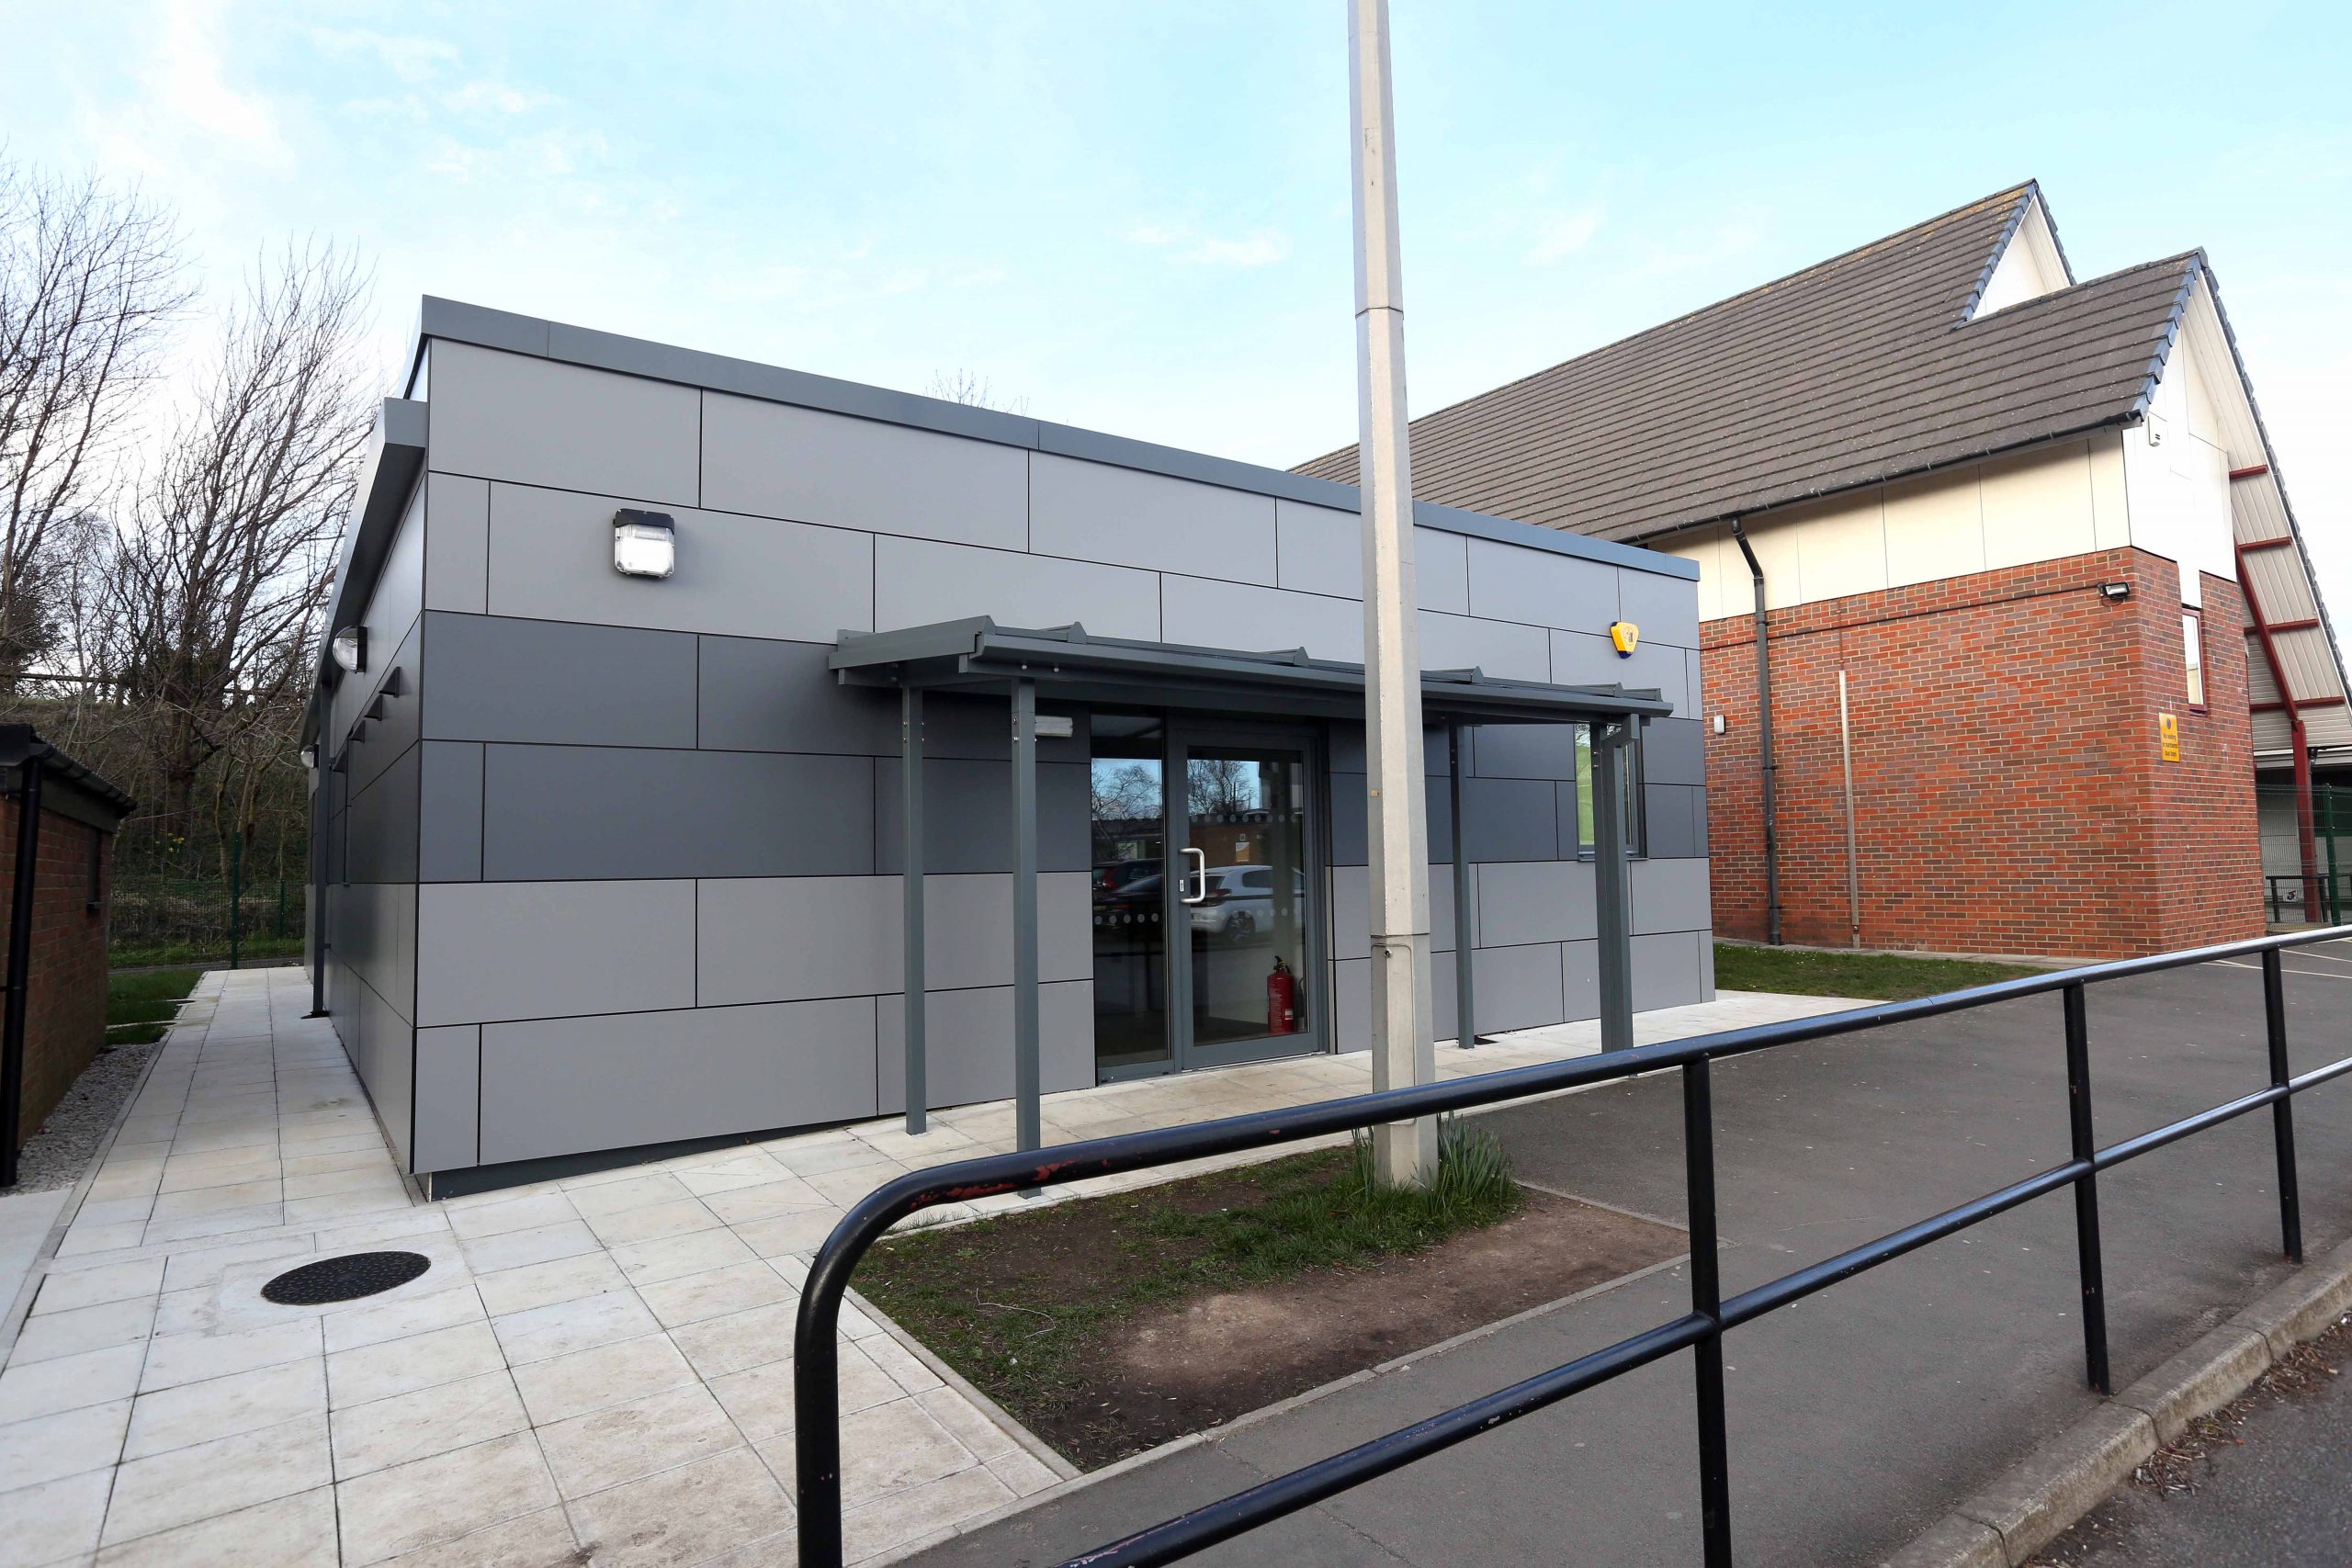 New cadet centre in Stokesley